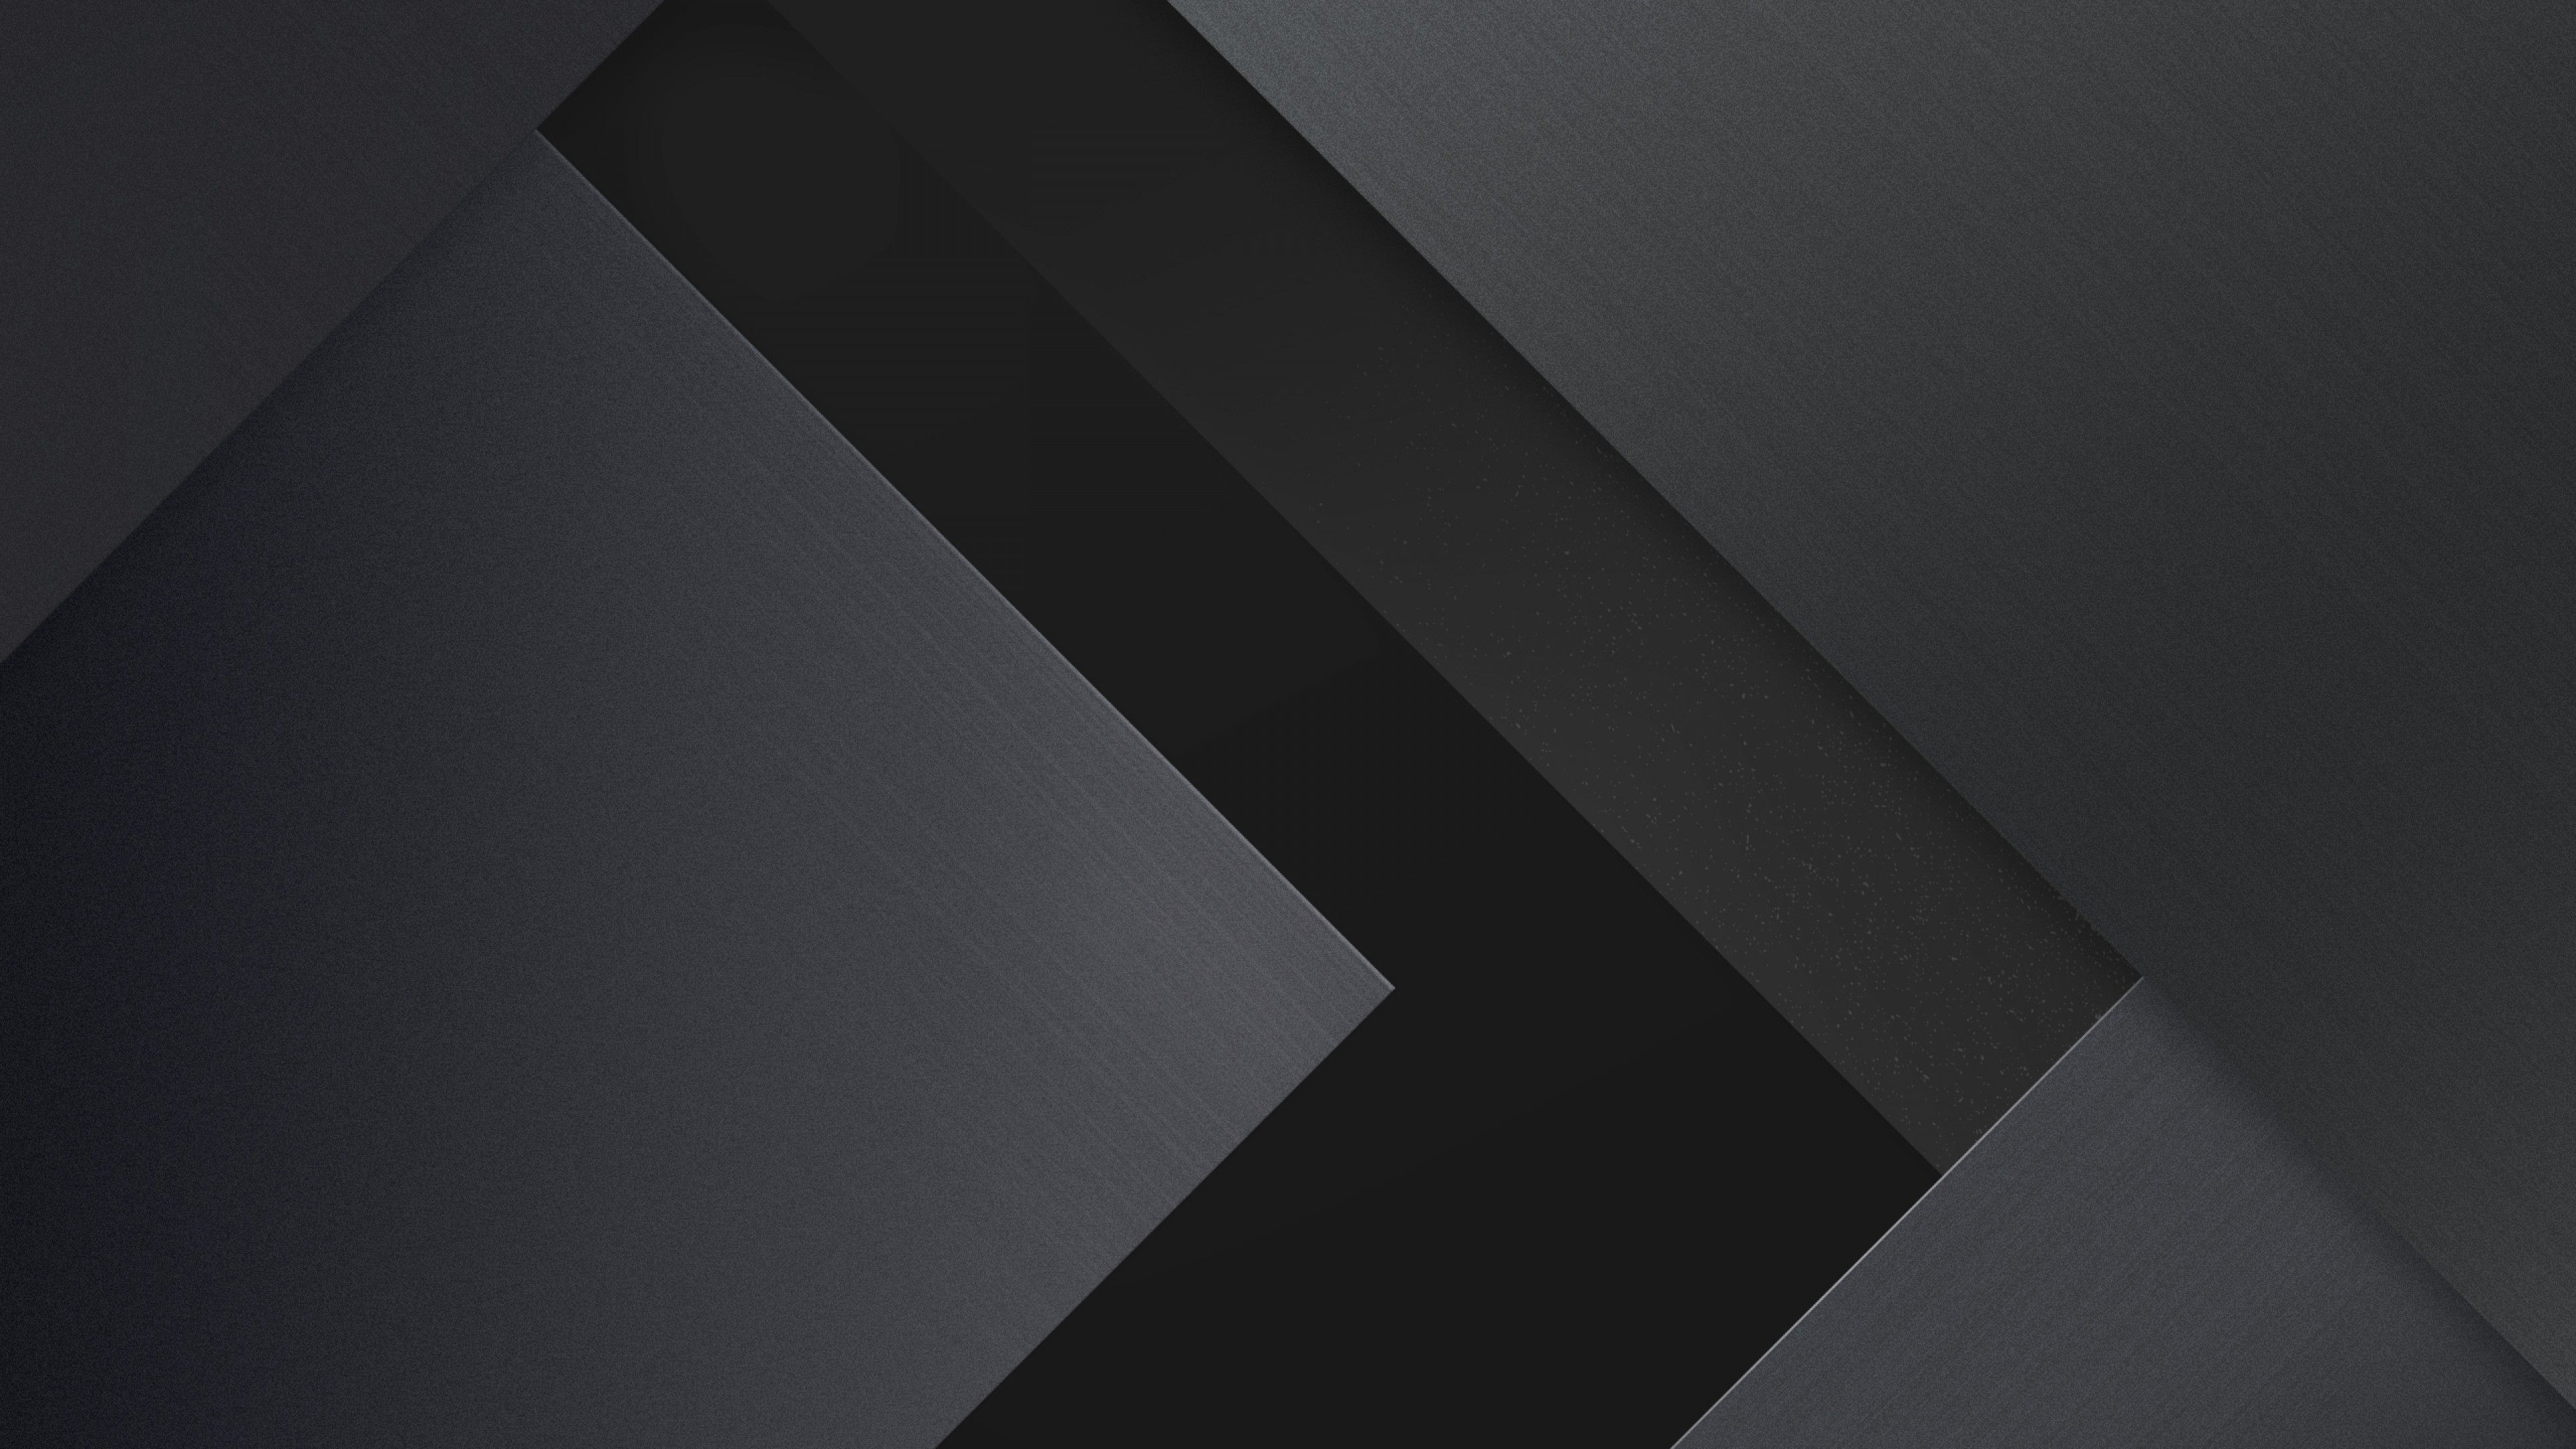 Black Wallpaper With Small Design - carrotapp